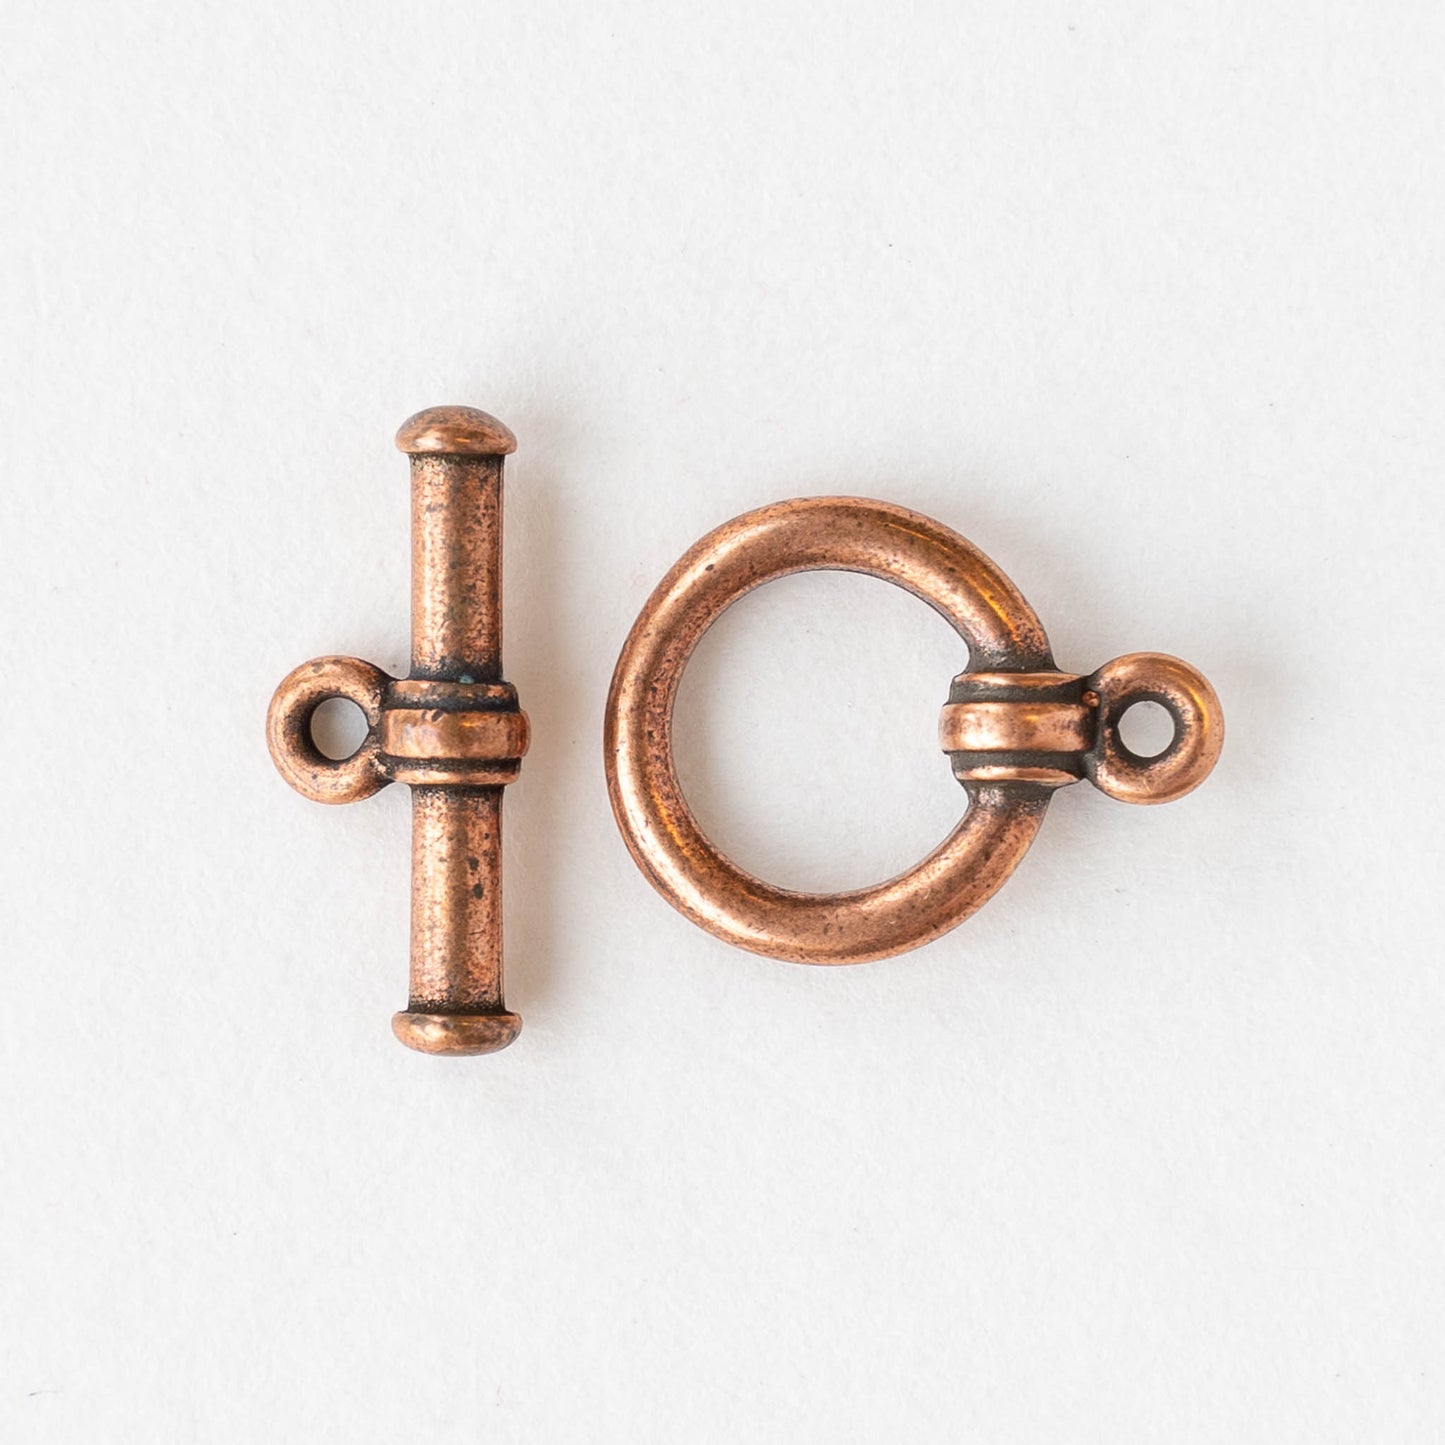 12.5mm Toggle Clasp - Antiqued Copper Finish - 2 Clasps